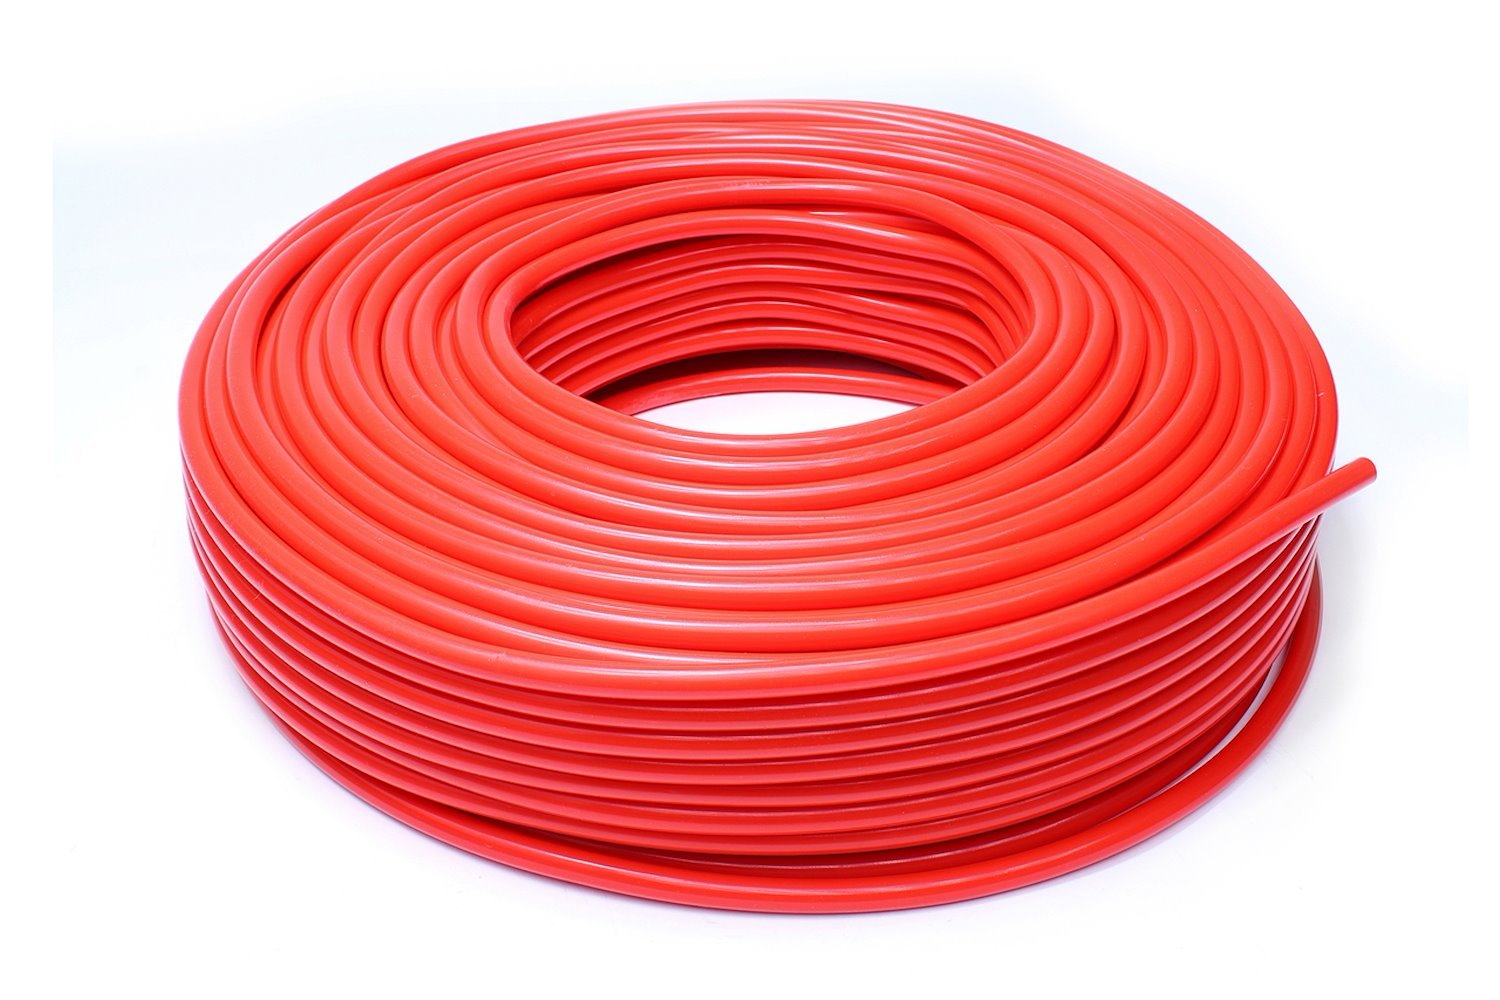 HTSVH7-REDx100 High-Temperature Silicone Vacuum Hose Tubing, 9/32 in. ID, 100 ft. Roll, Red